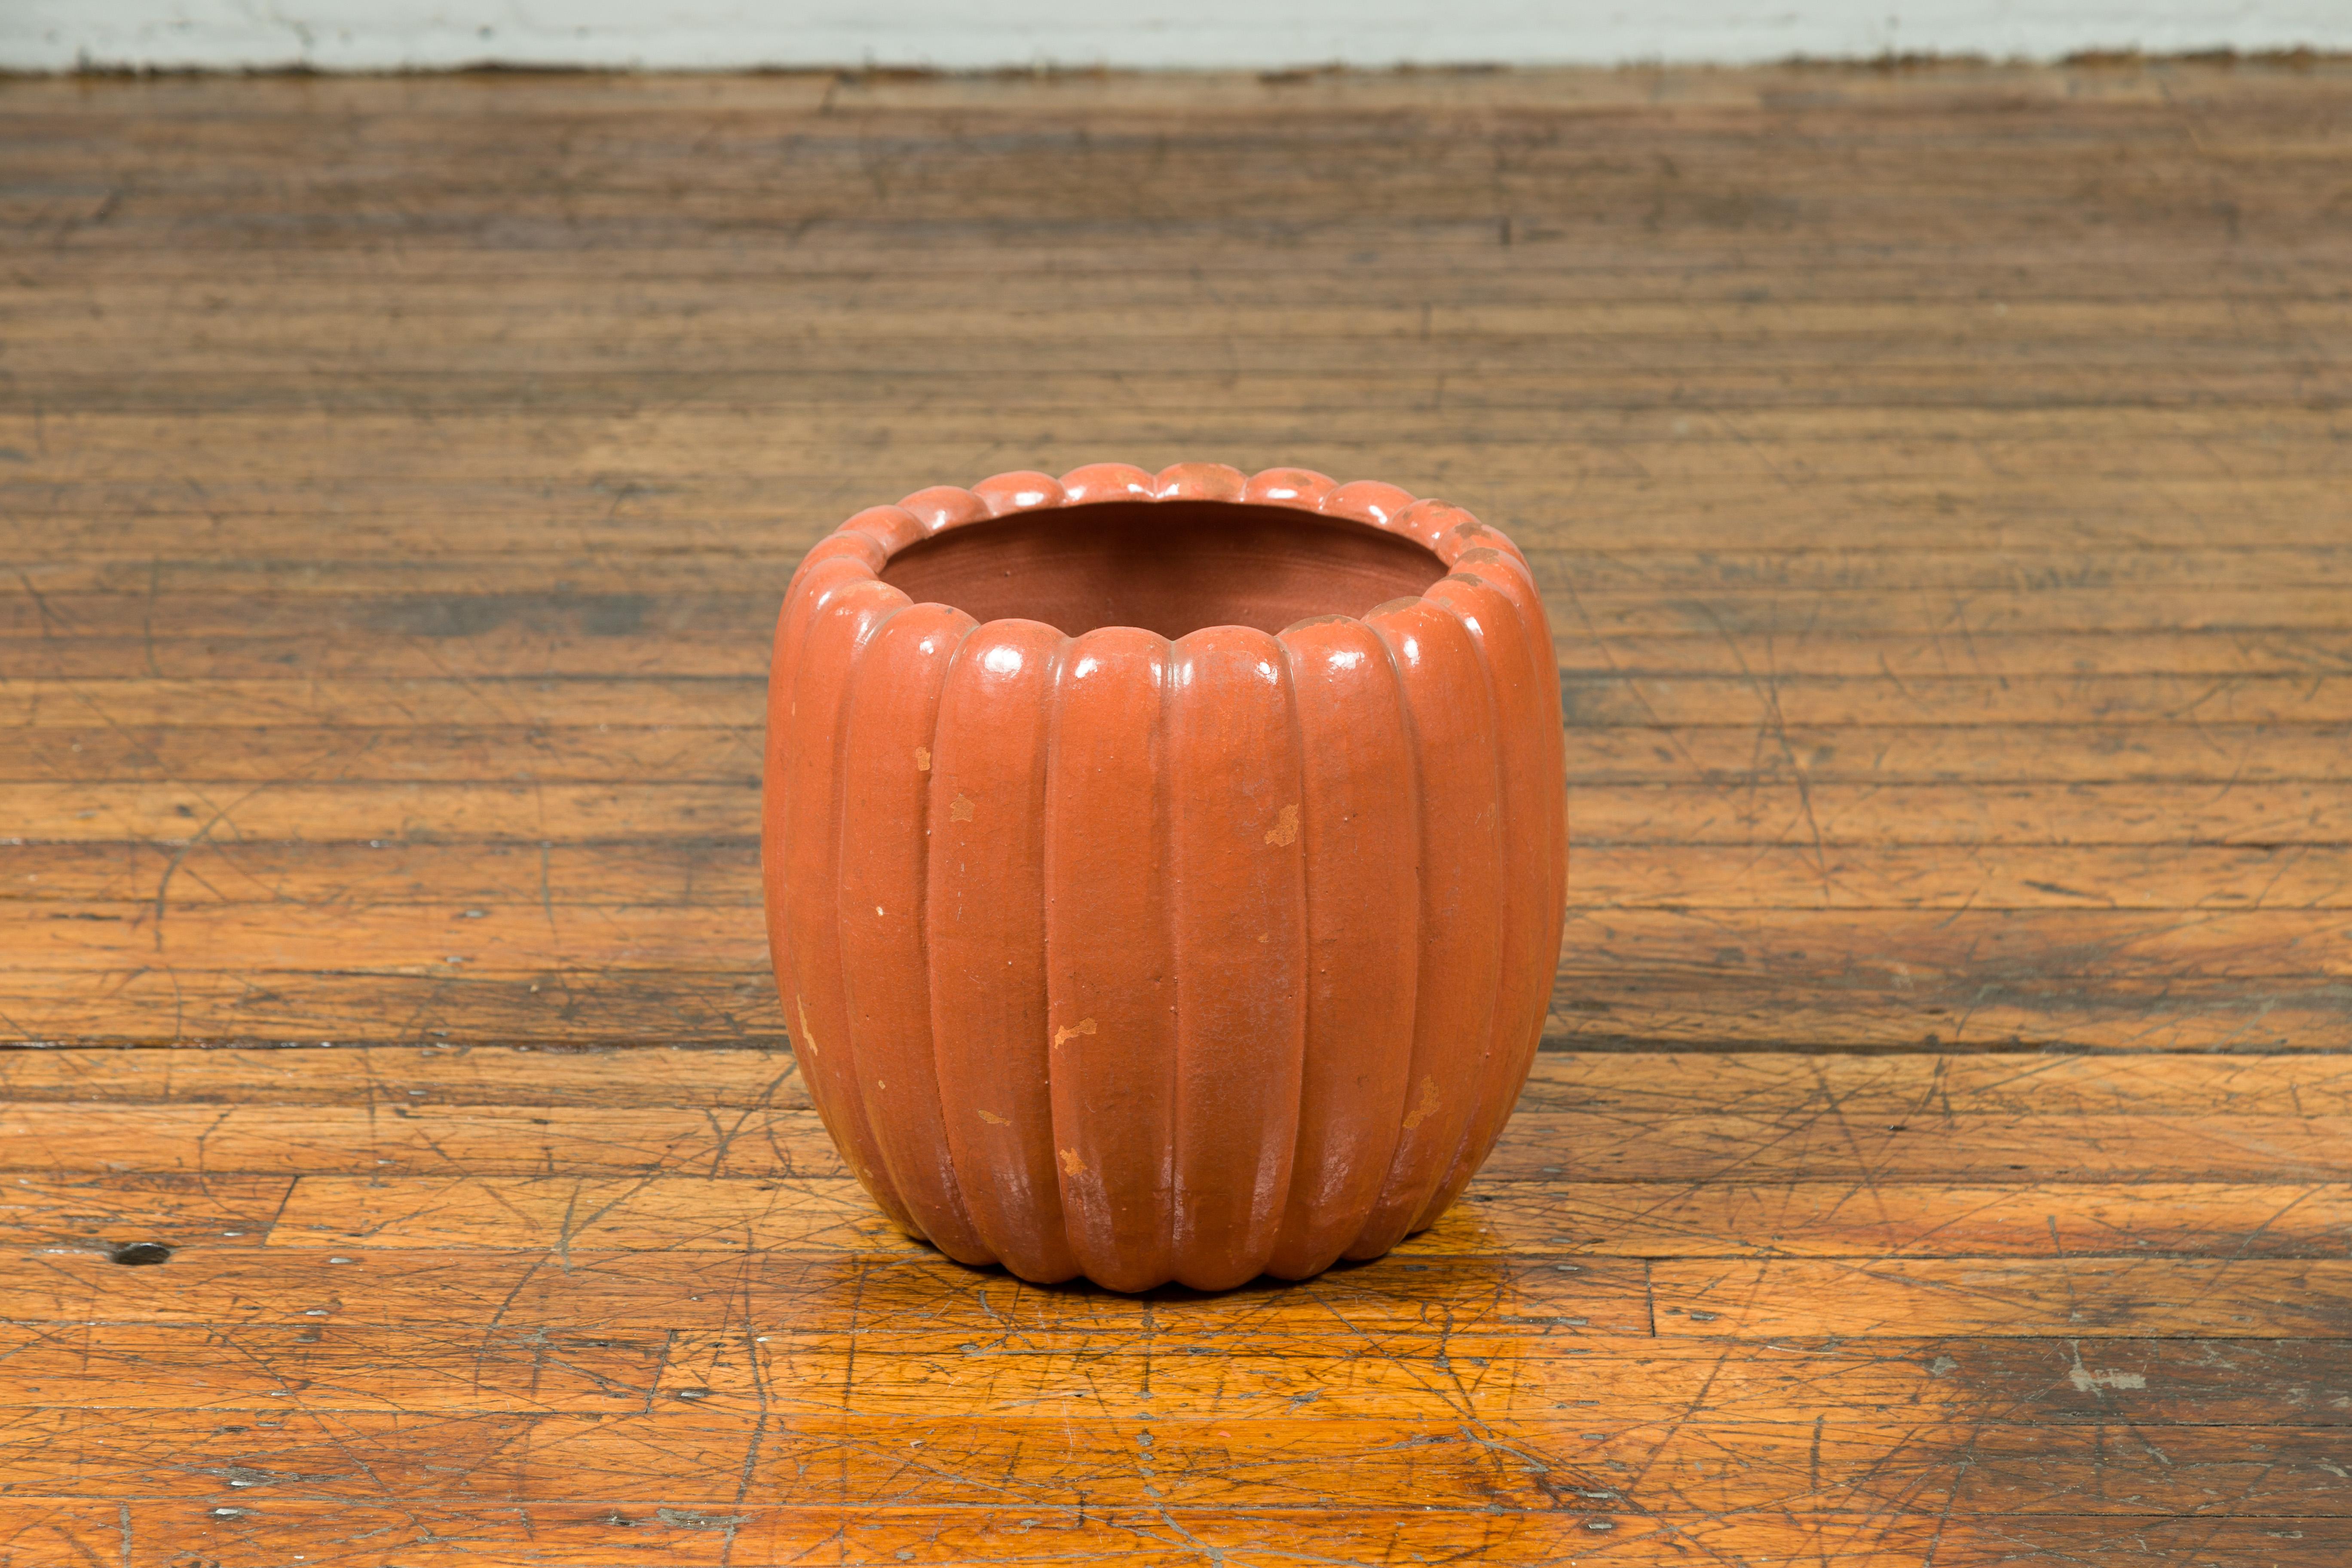 A Japanese Taisho period handmade pumpkin-shaped planter from the early 20th century, with distressed marks. Crafted in Japan during the Taisho period (circa 1912-1926), this whimsical planter features a coral pumpkin gadrooned shape, showcasing